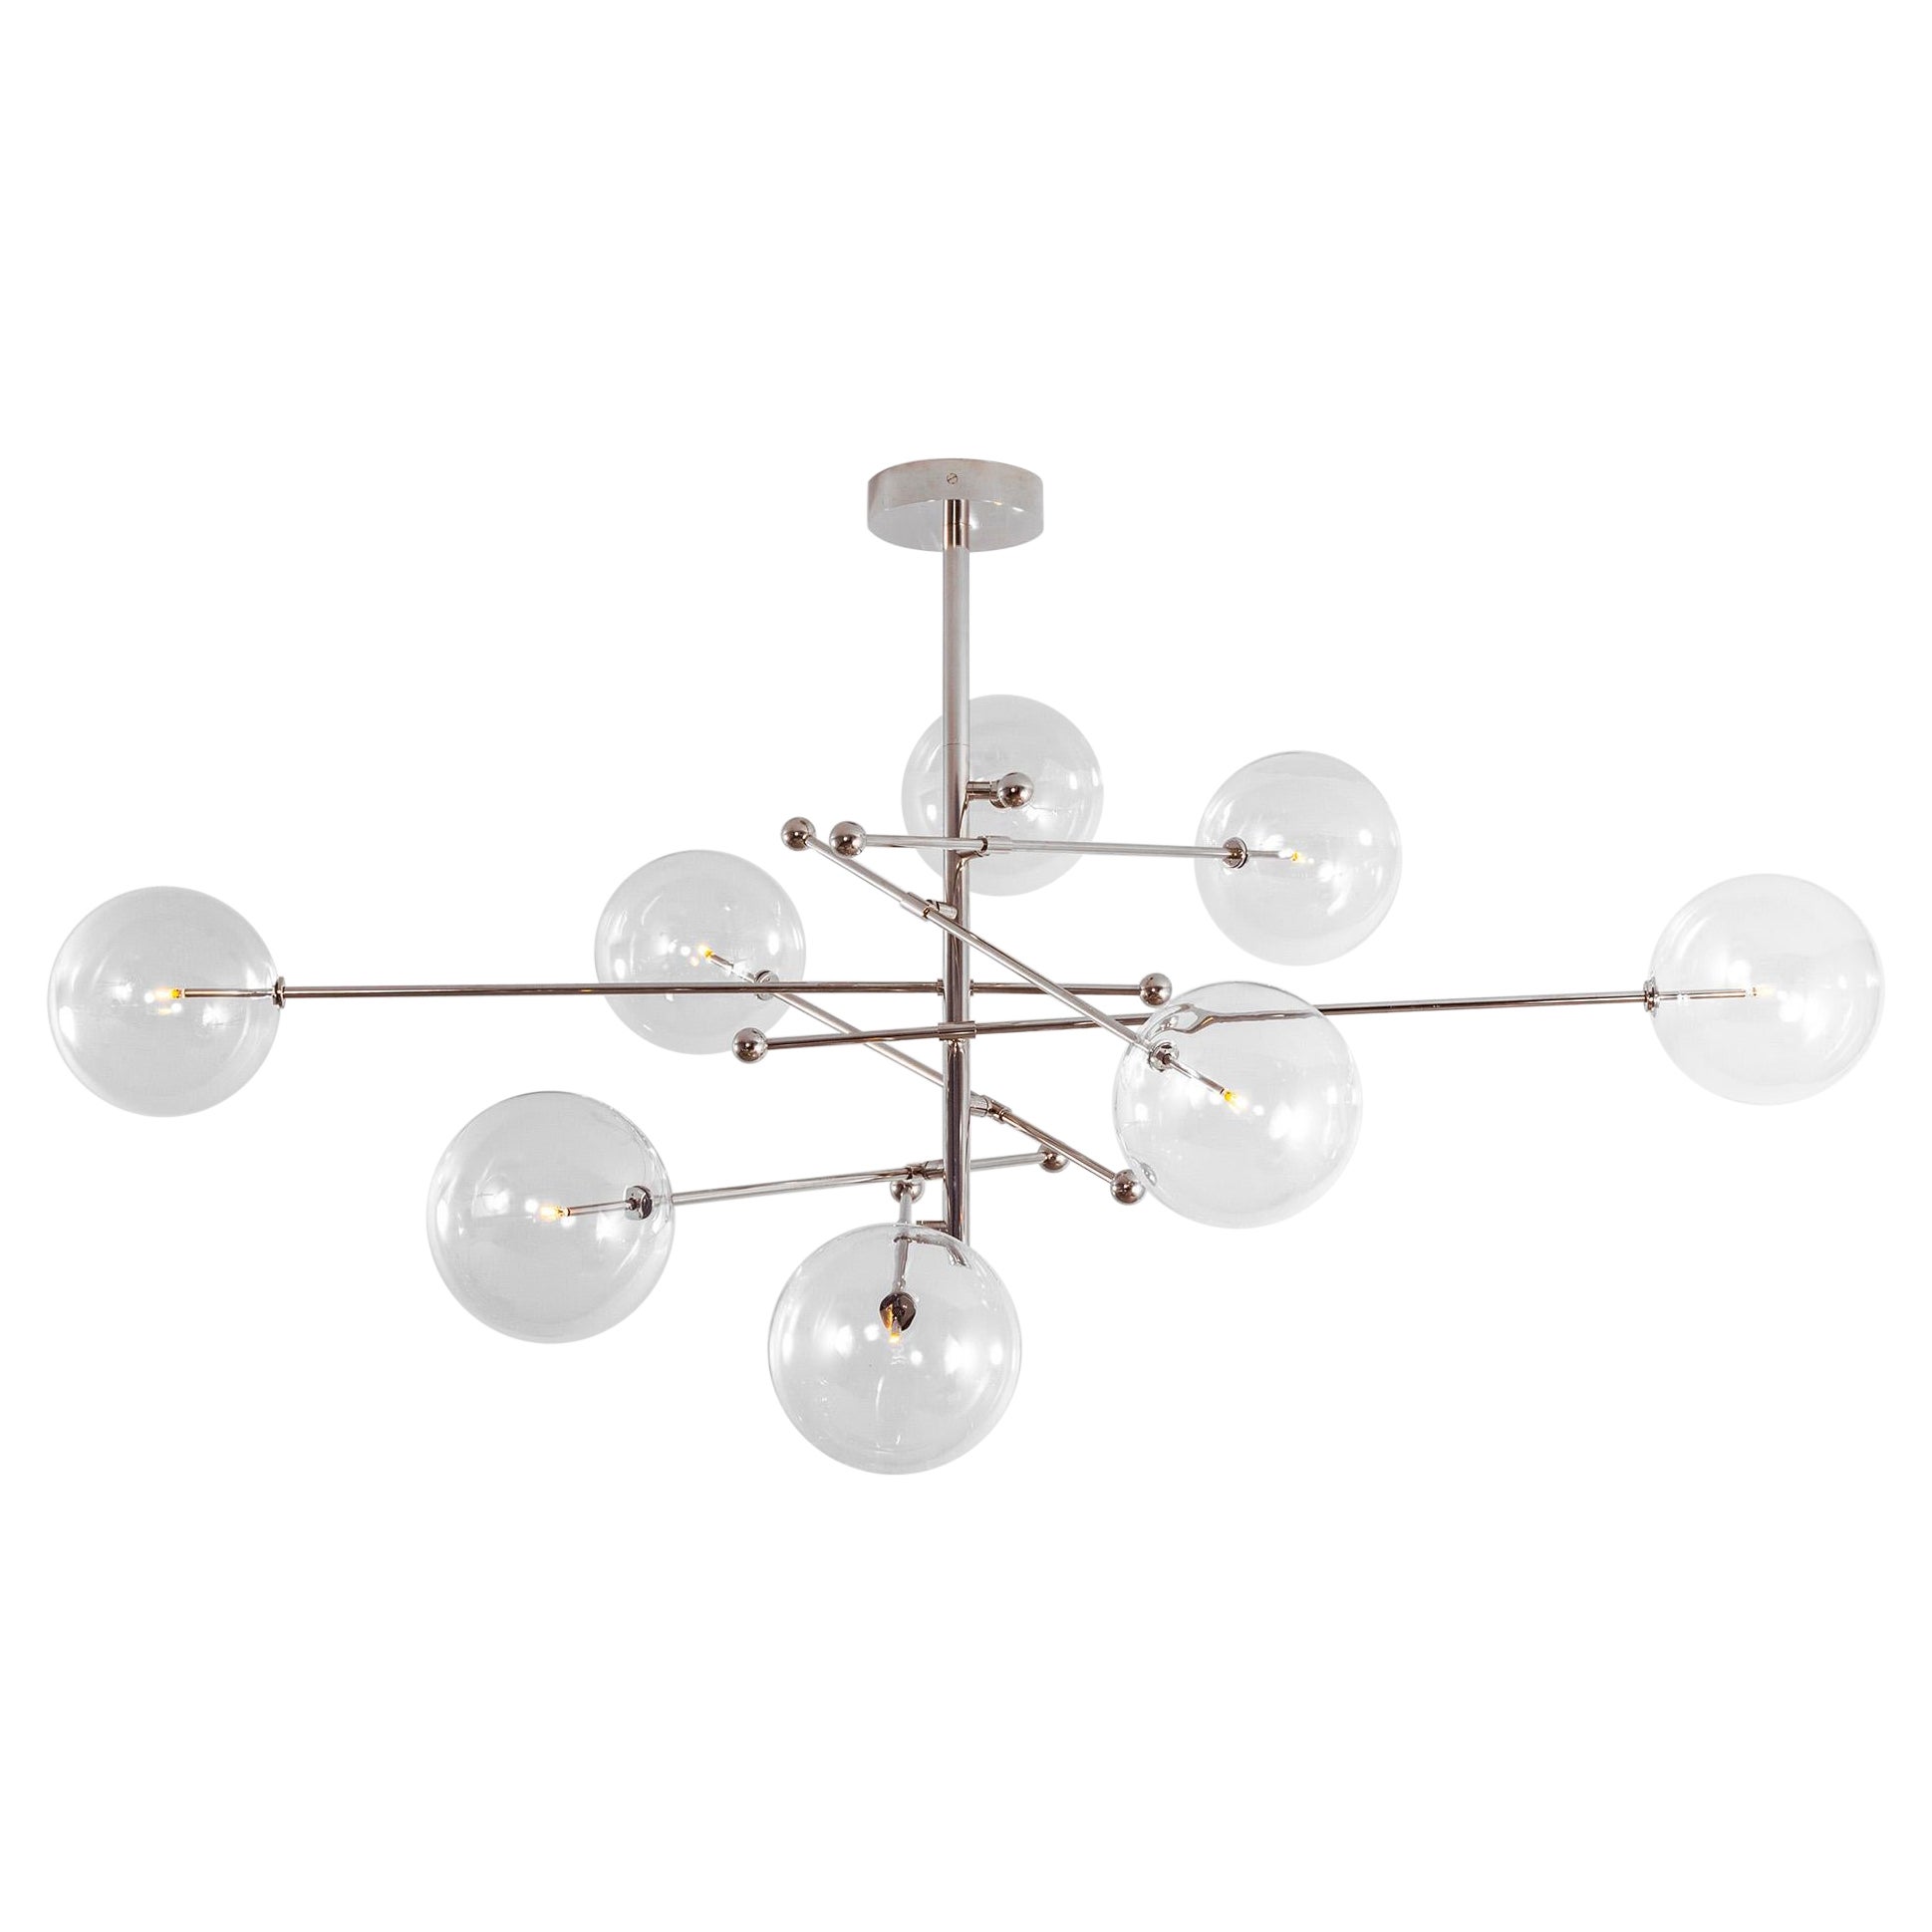 RD15 12 Arms Polished Nickel Chandelier by Schwung For Sale